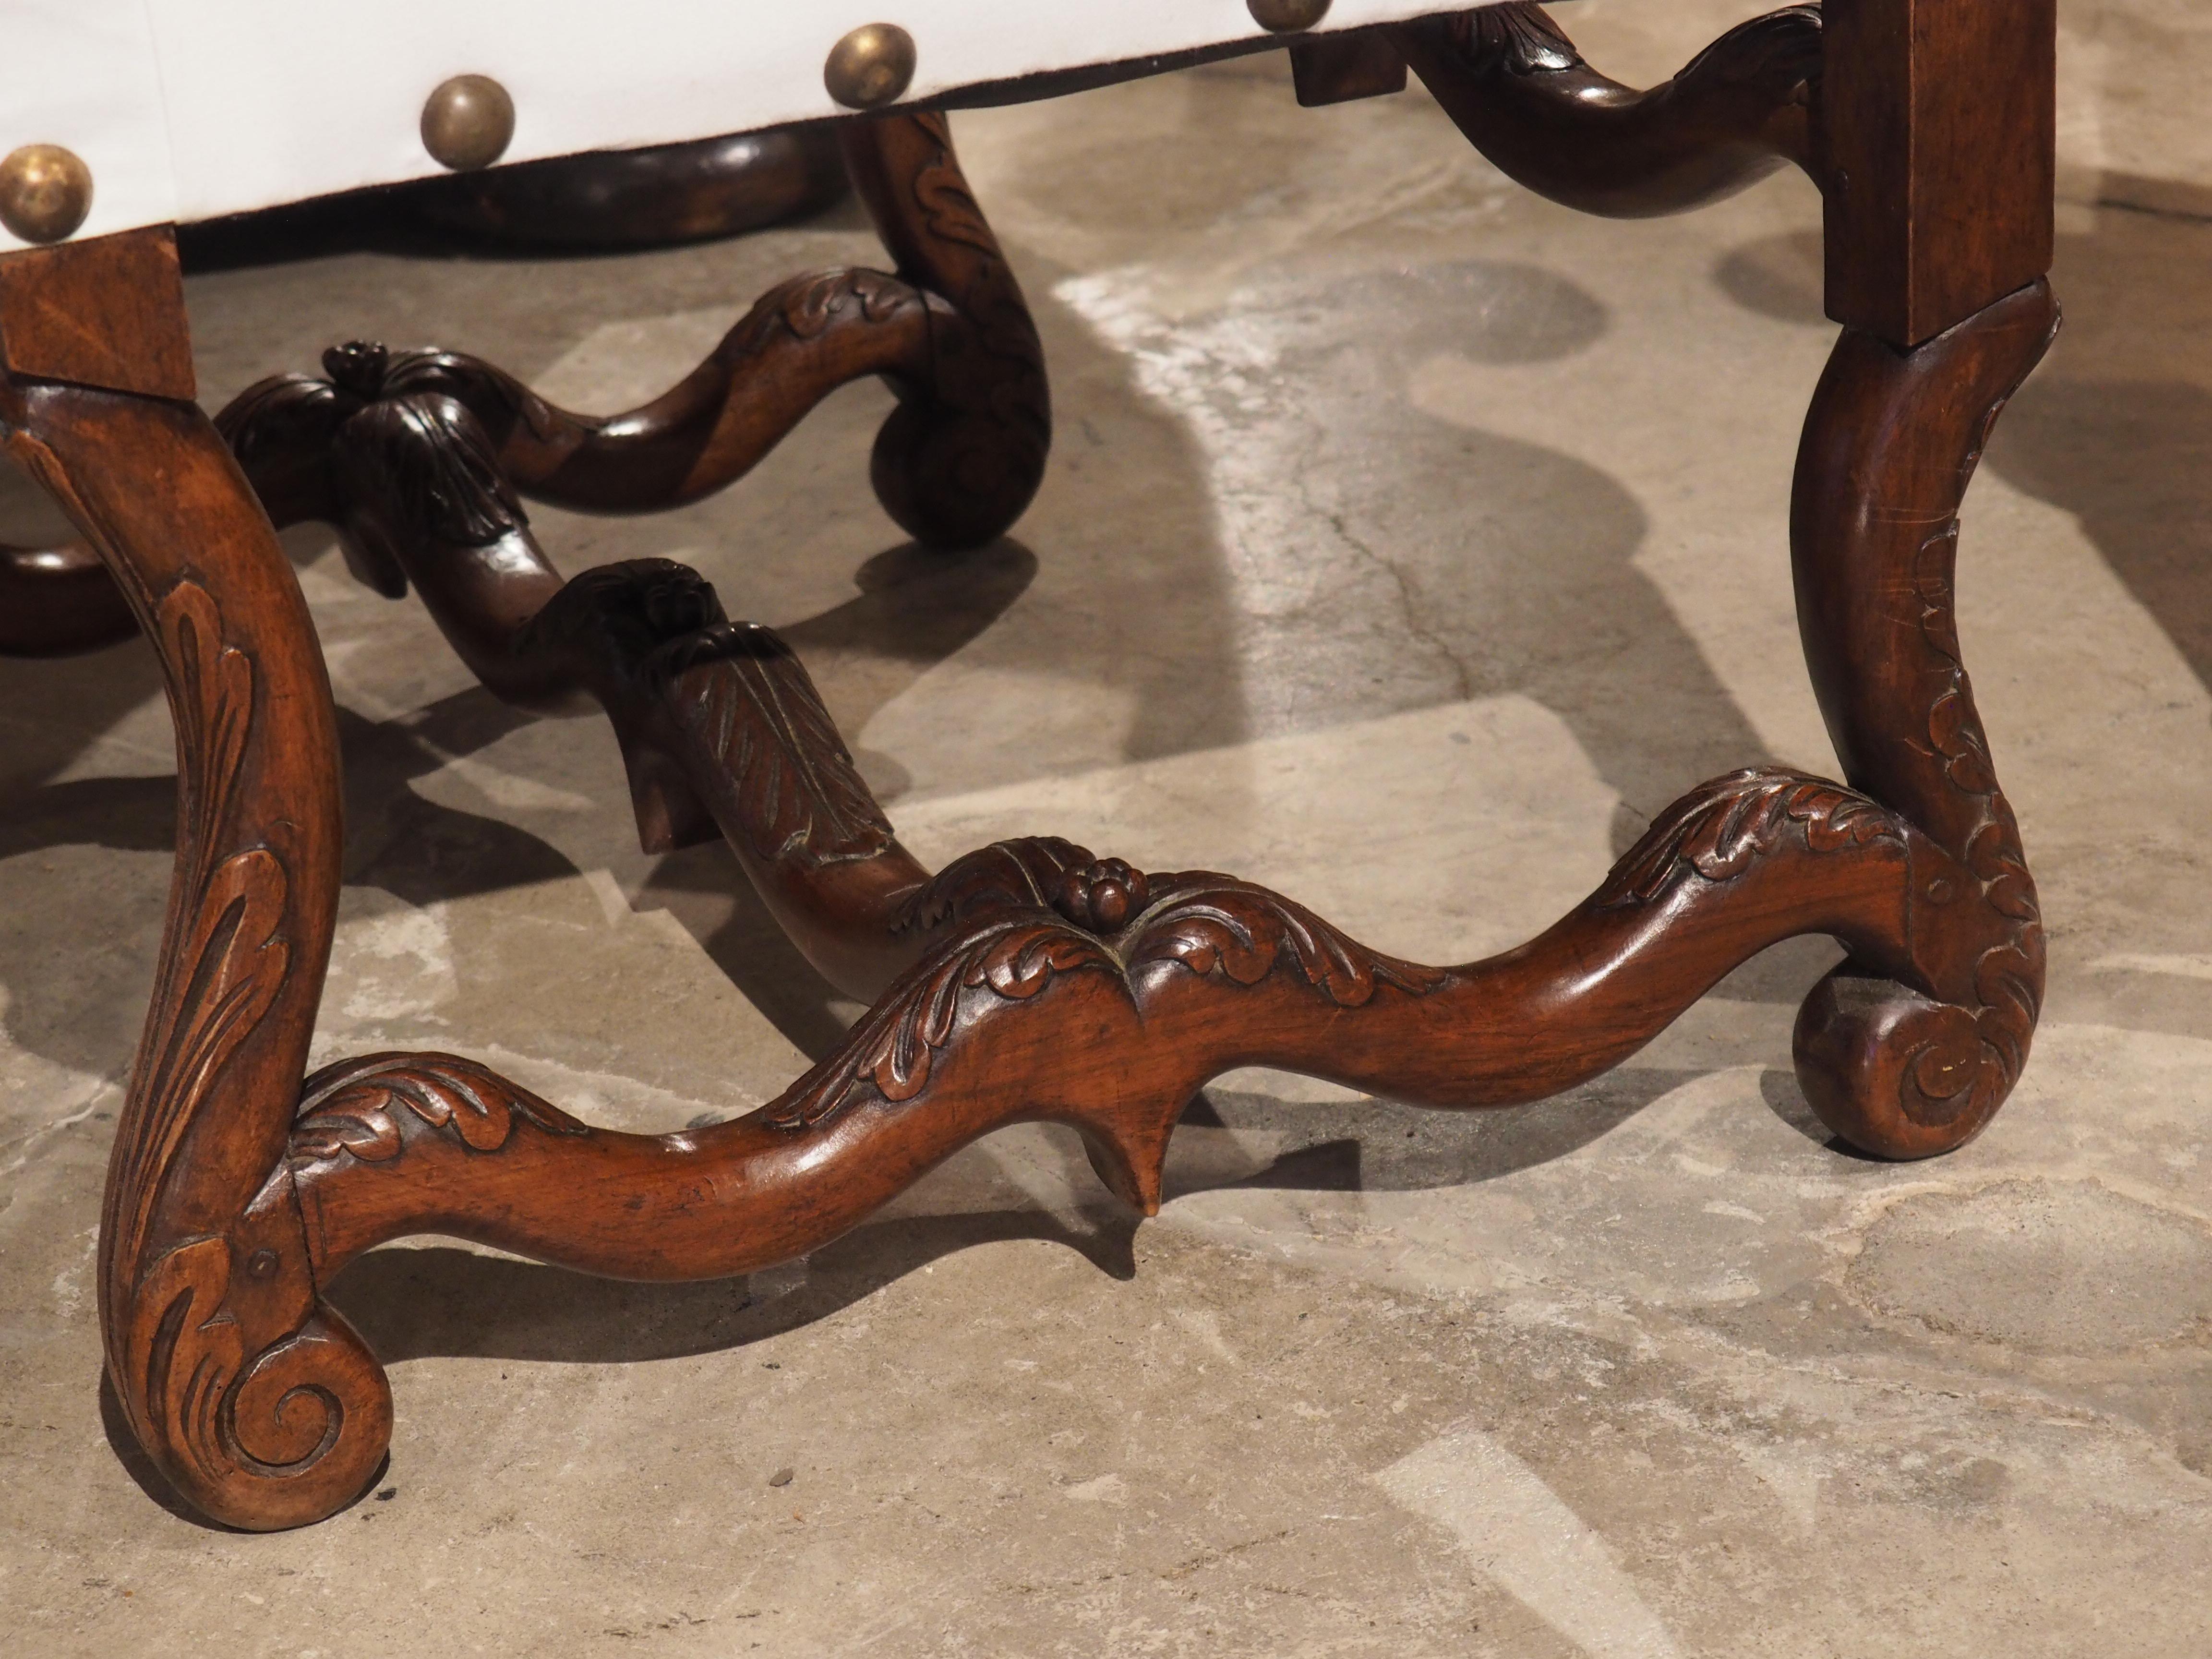 hand carved in walnut, circa 1830, this pair of antique armchairs were produced in the department of Lot, in southwestern France. Sinuous arms extend from the front of the large, slightly reclining back rest. Each arm is adorned with two carved